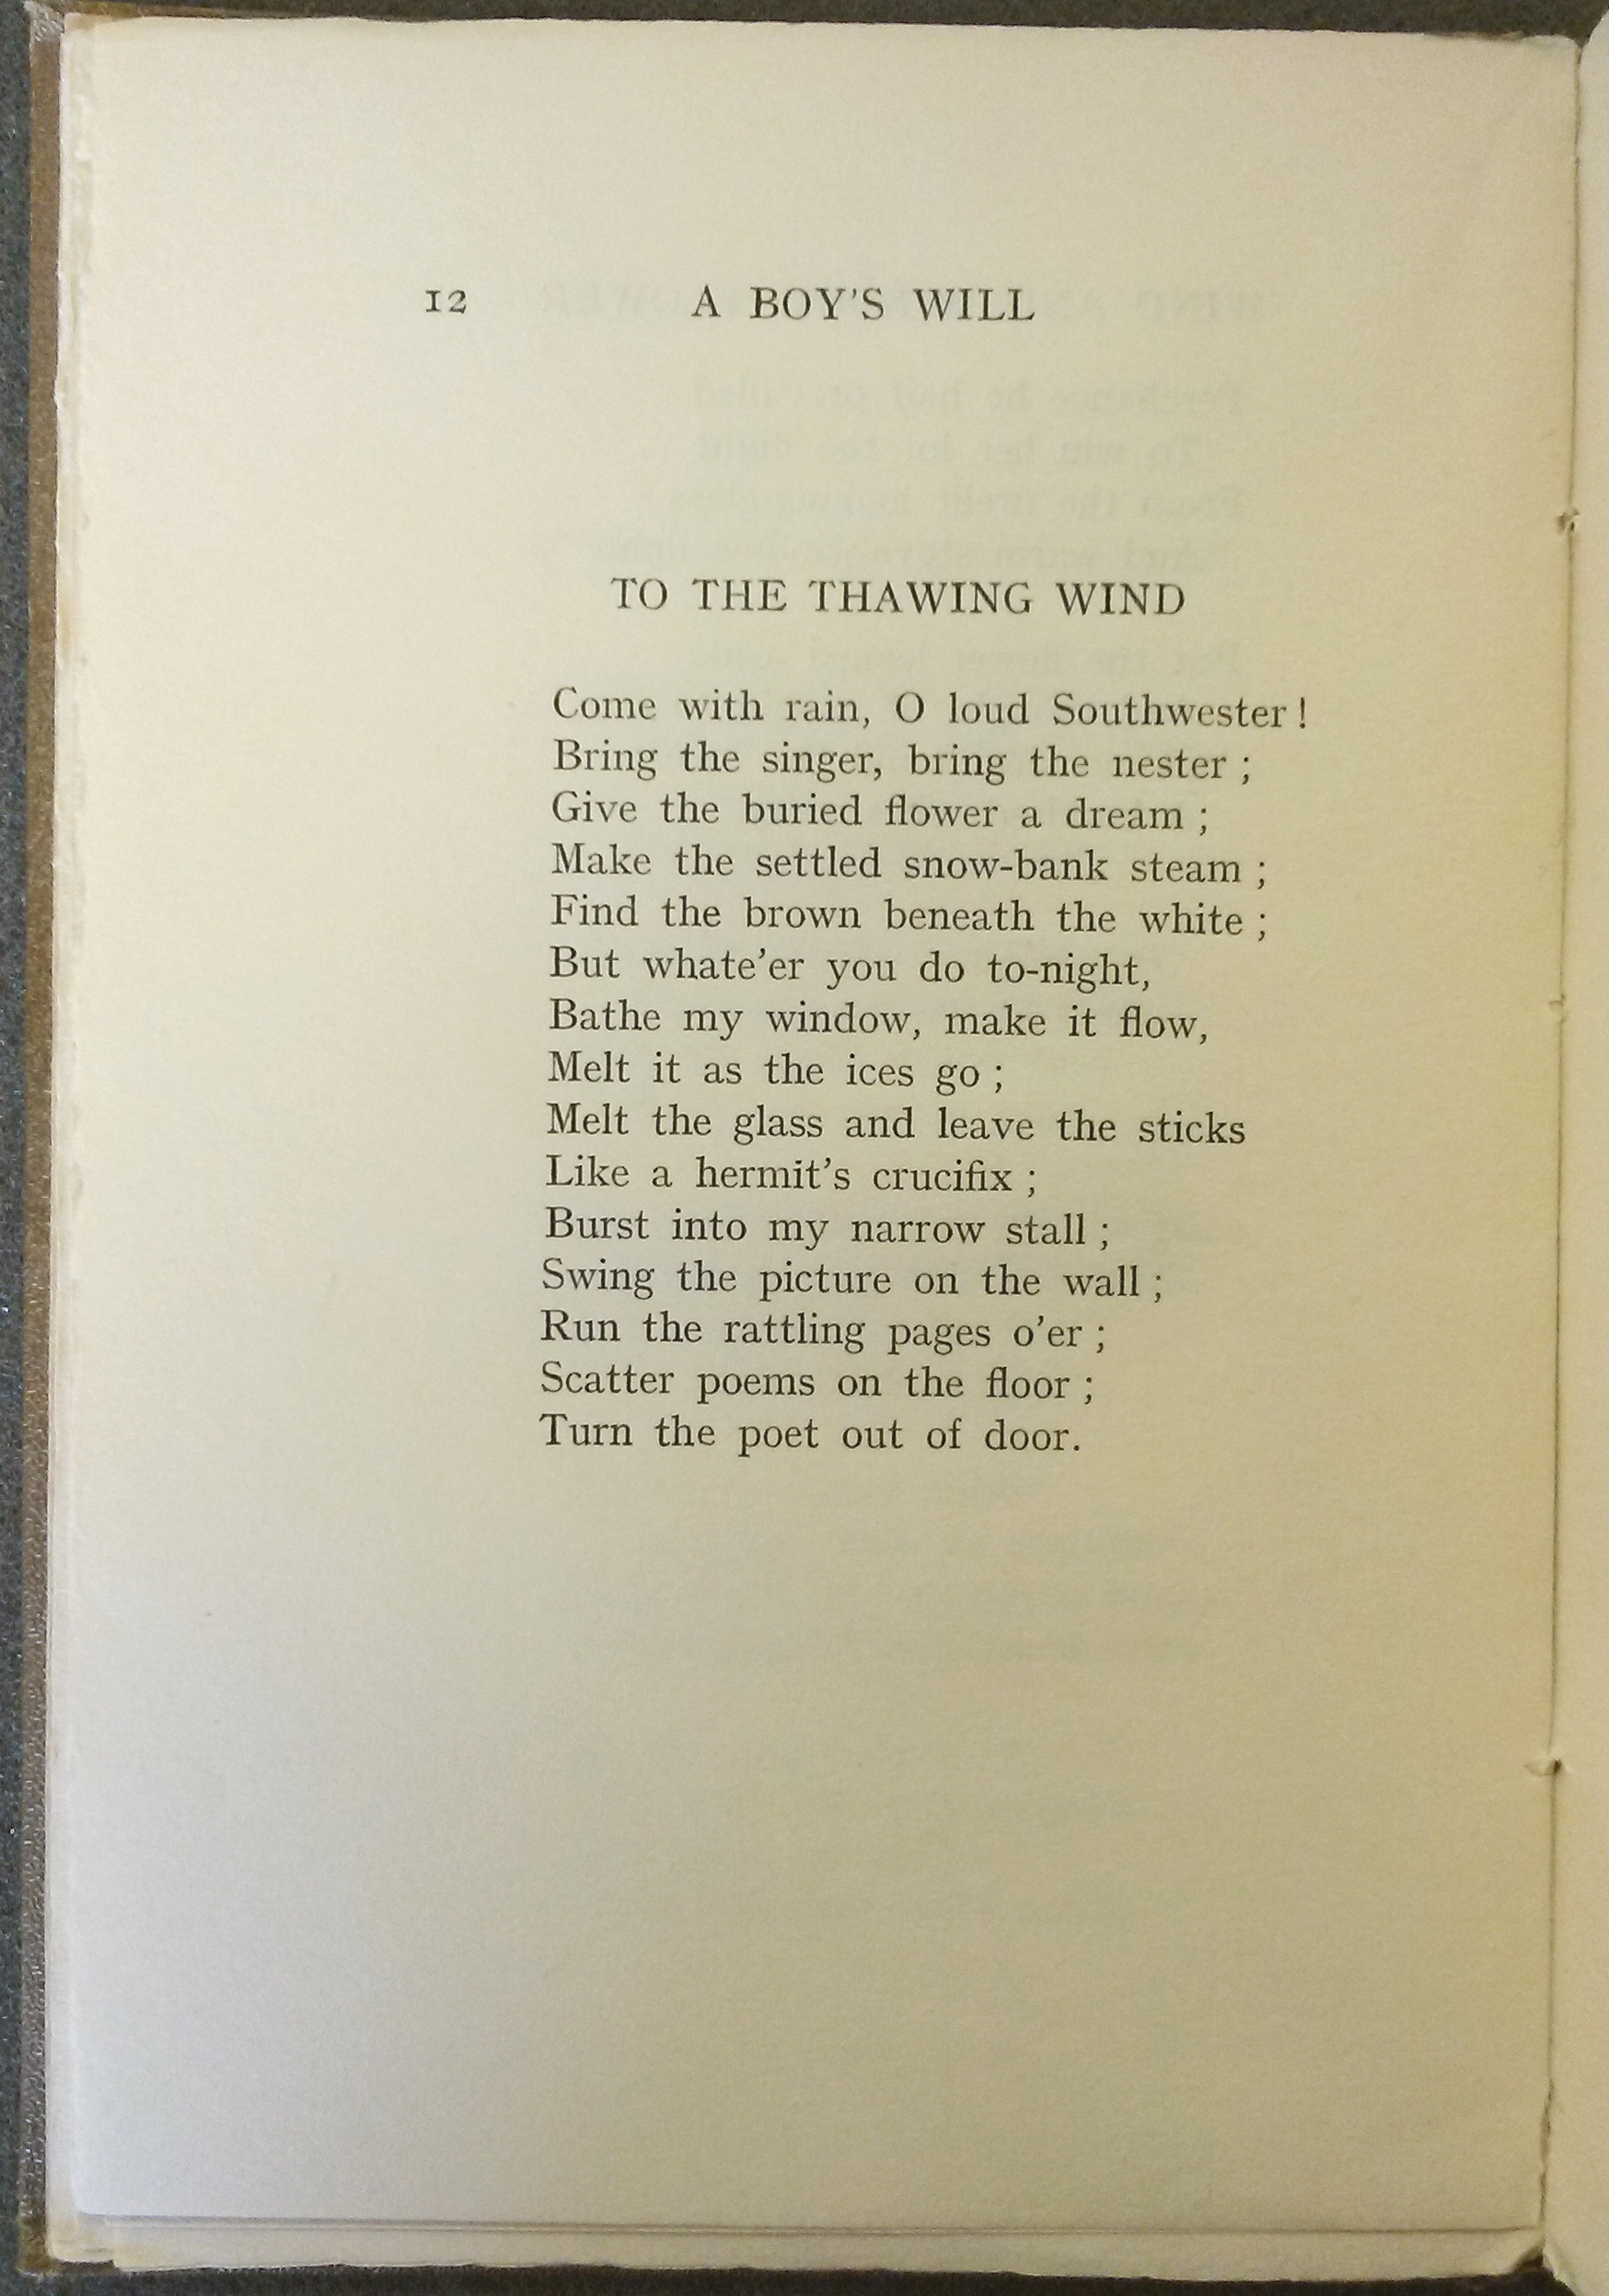 Text of "The Thawing Wind"